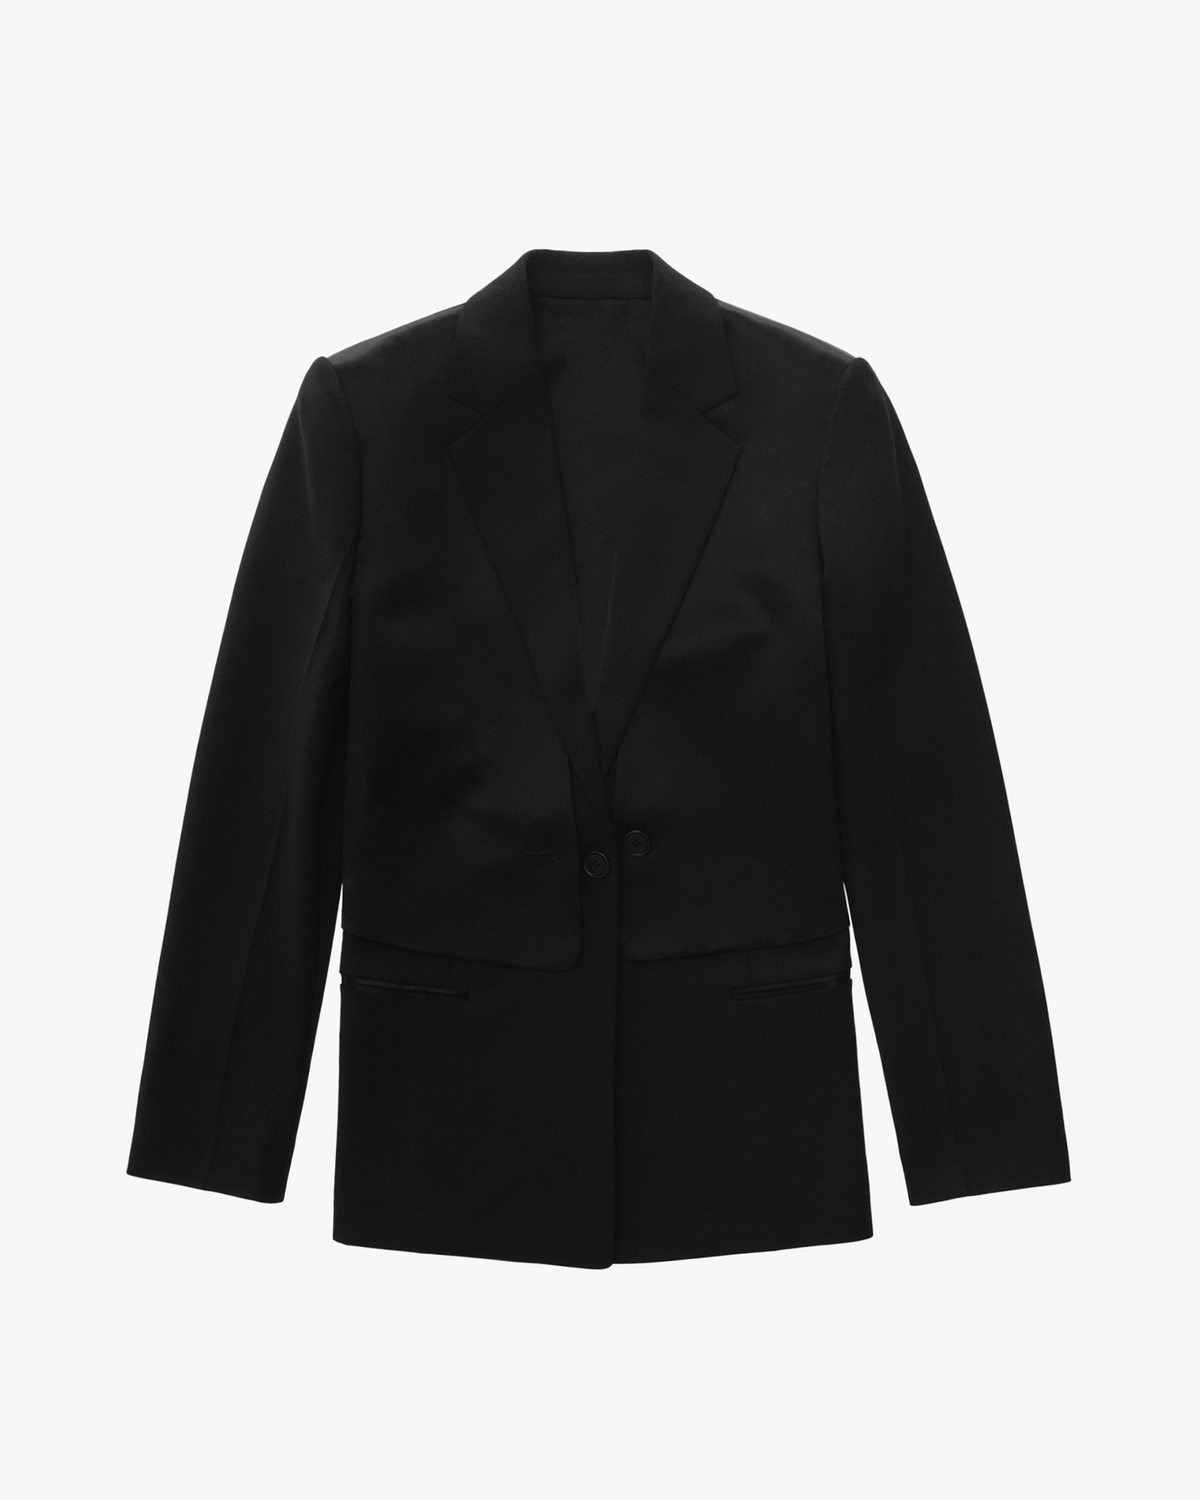 WWW.HELMUTLANG.COM | Finest Clothing and Luxury Goods for Women 